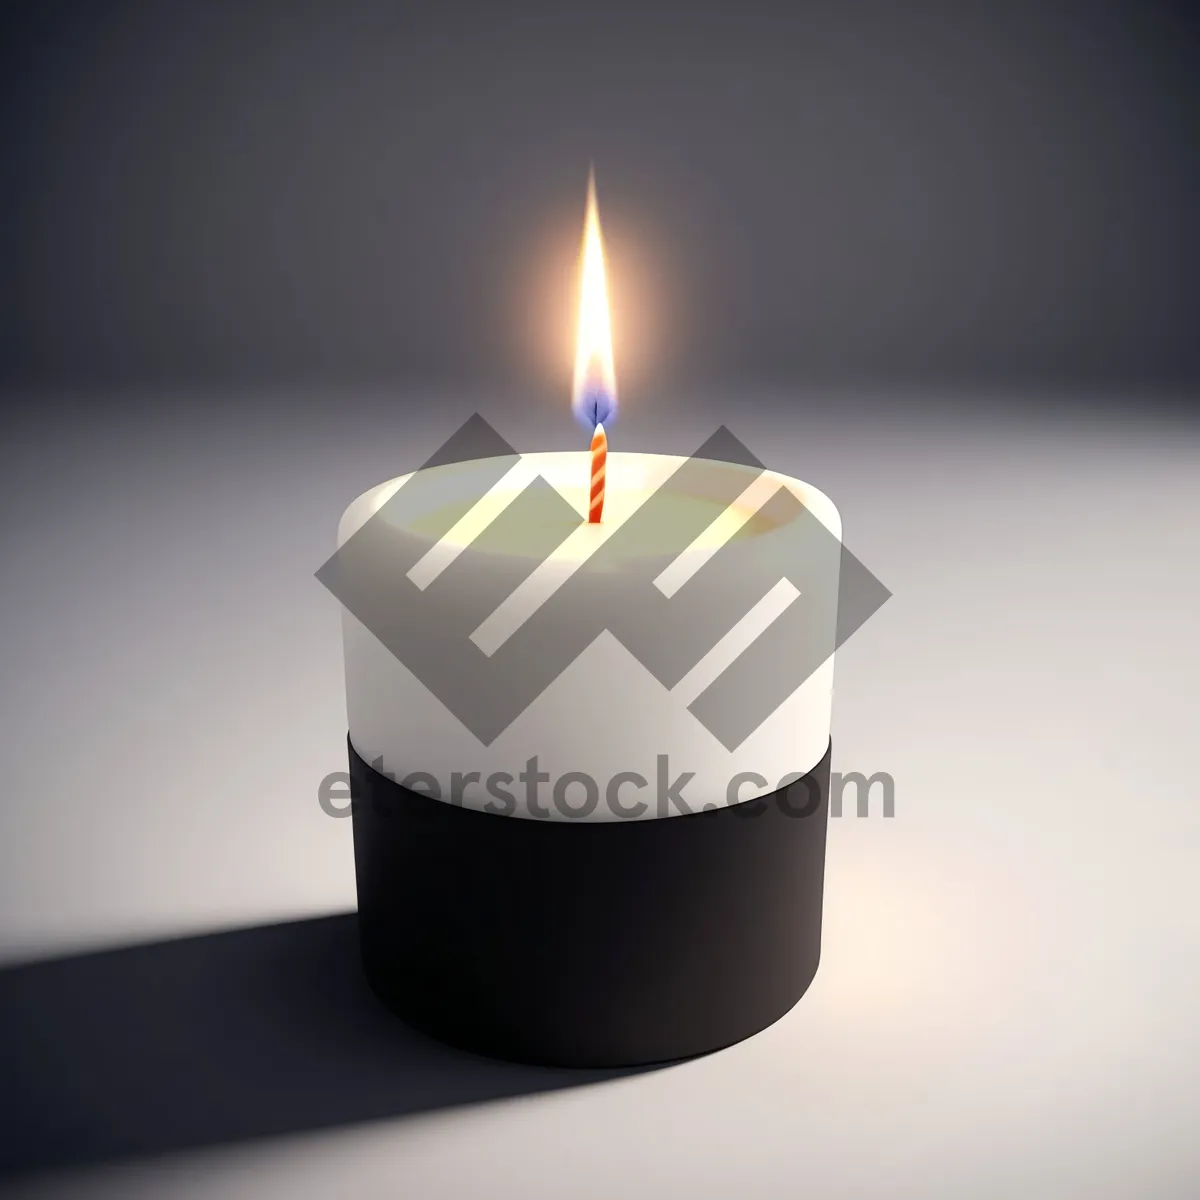 Picture of Wax Candle Flame - Iconic Light Source